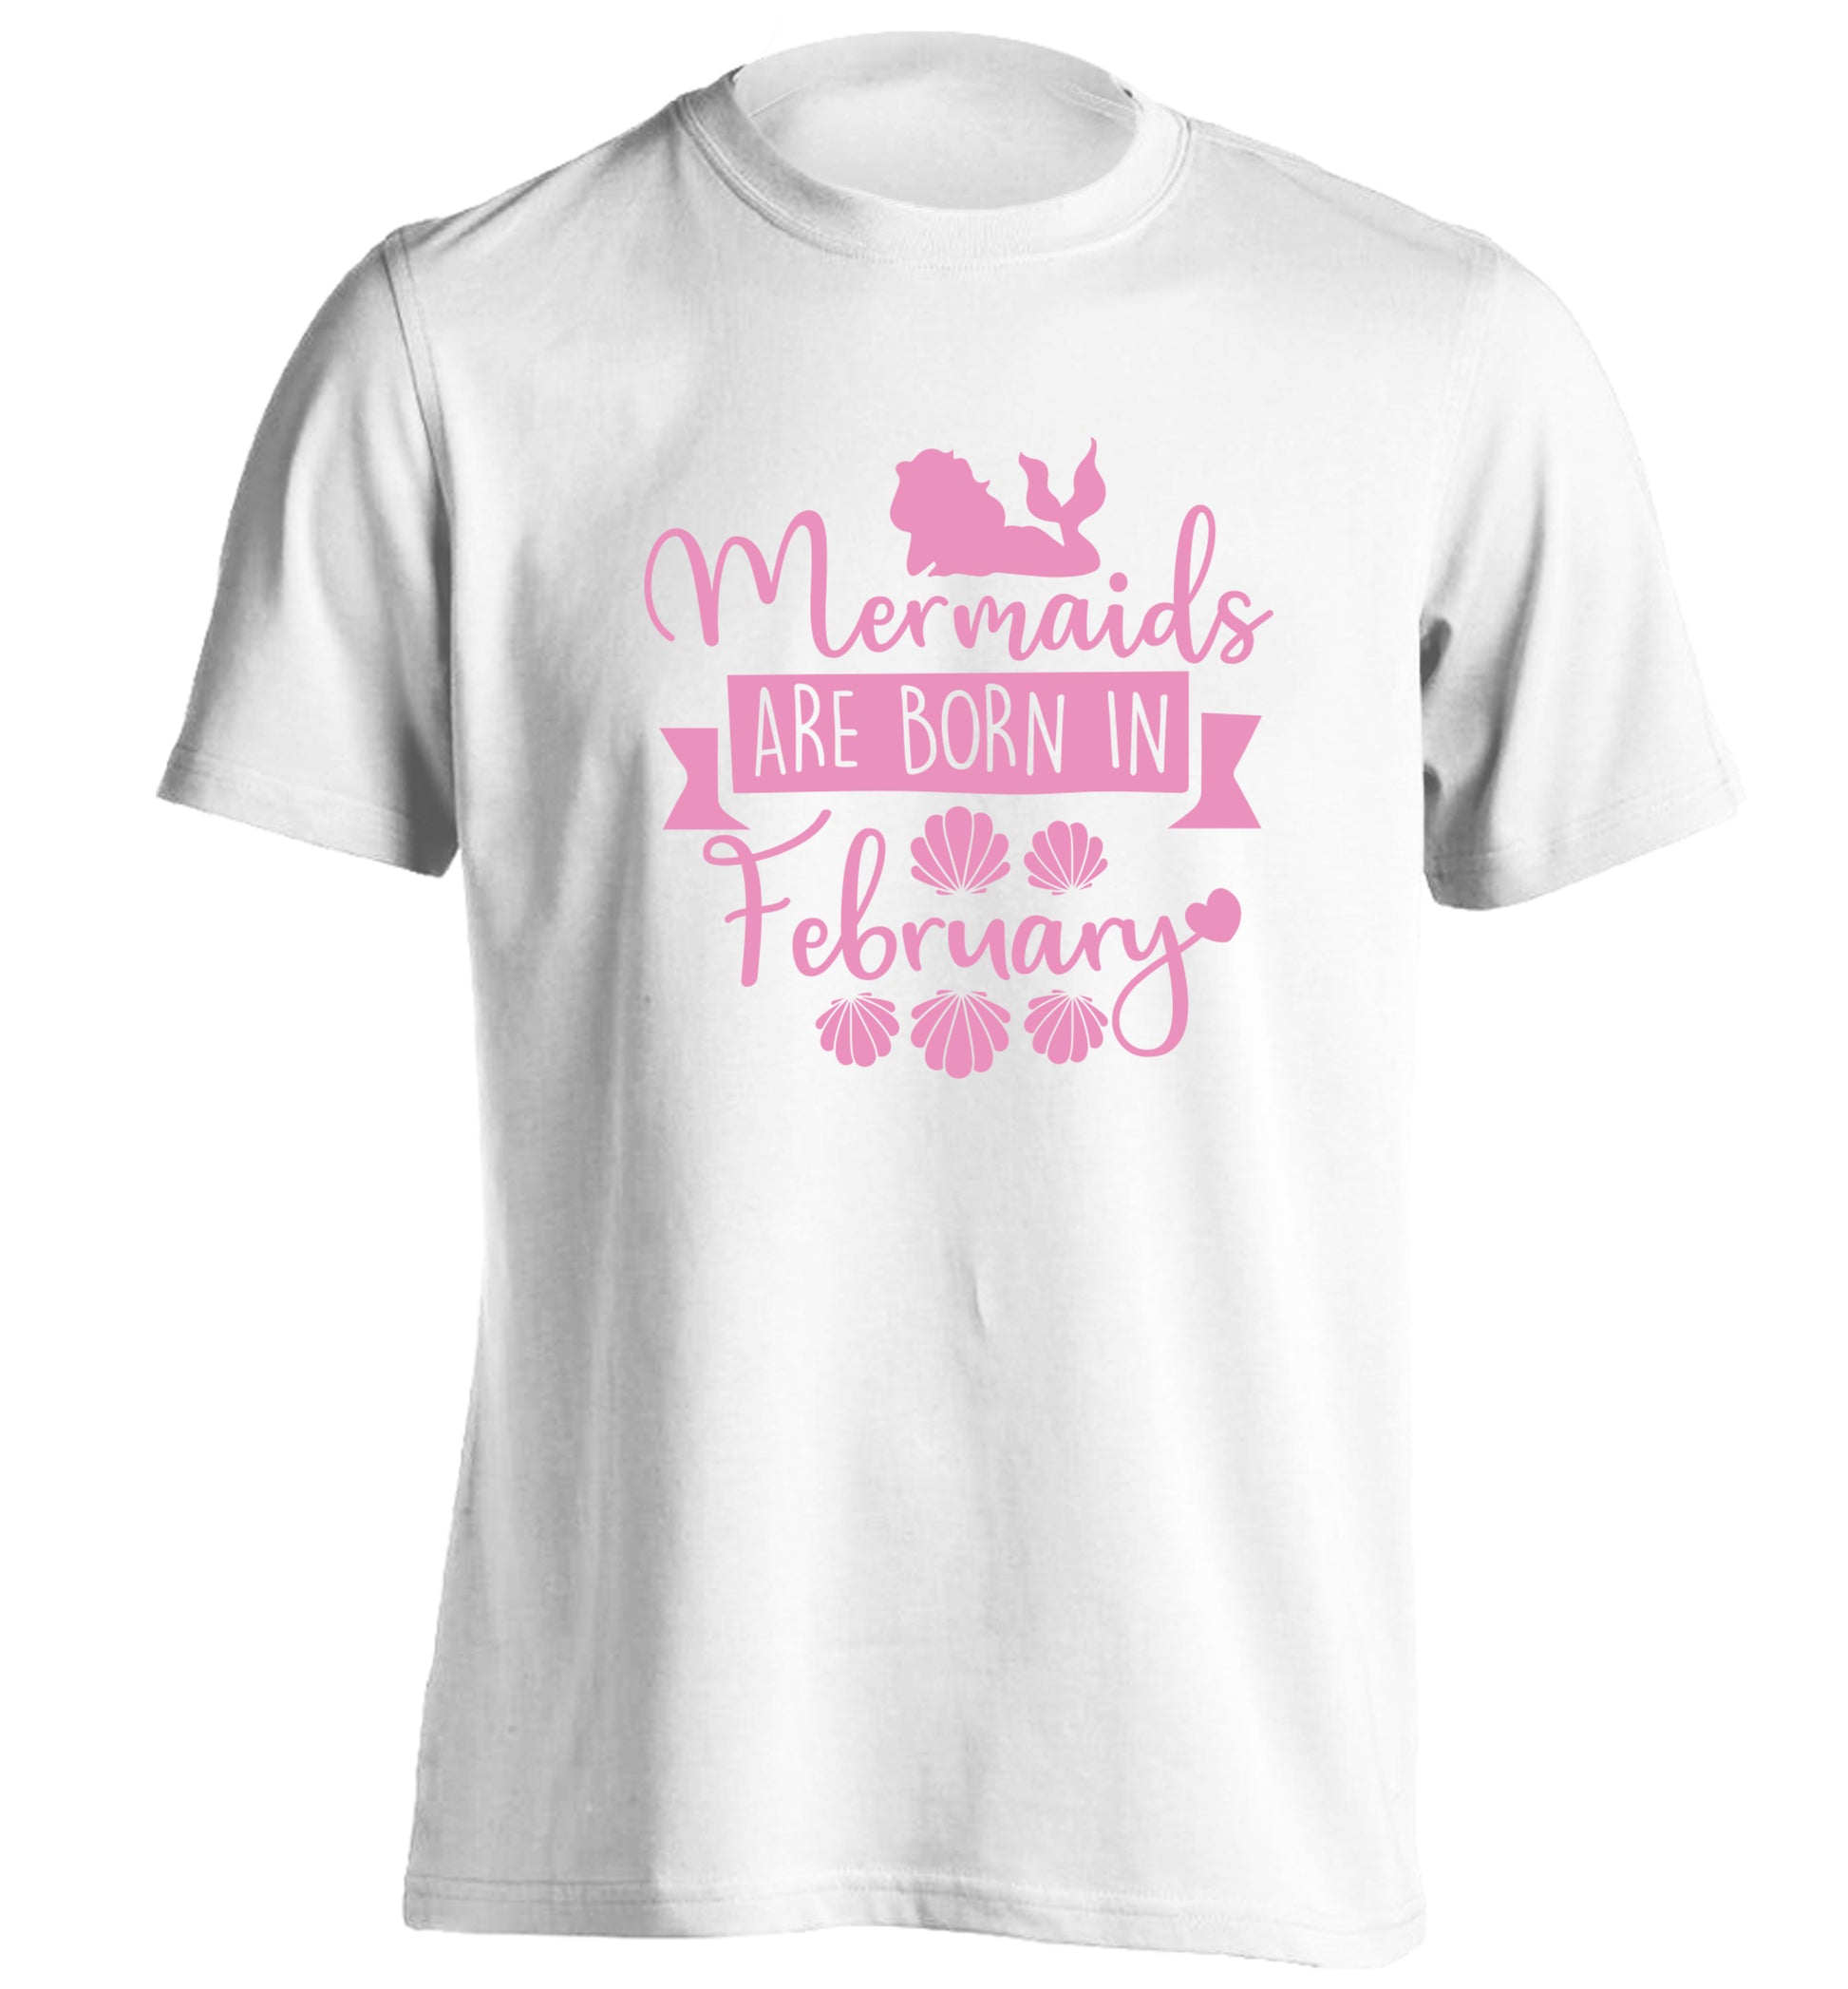 Mermaids are born in February adults unisex white Tshirt 2XL